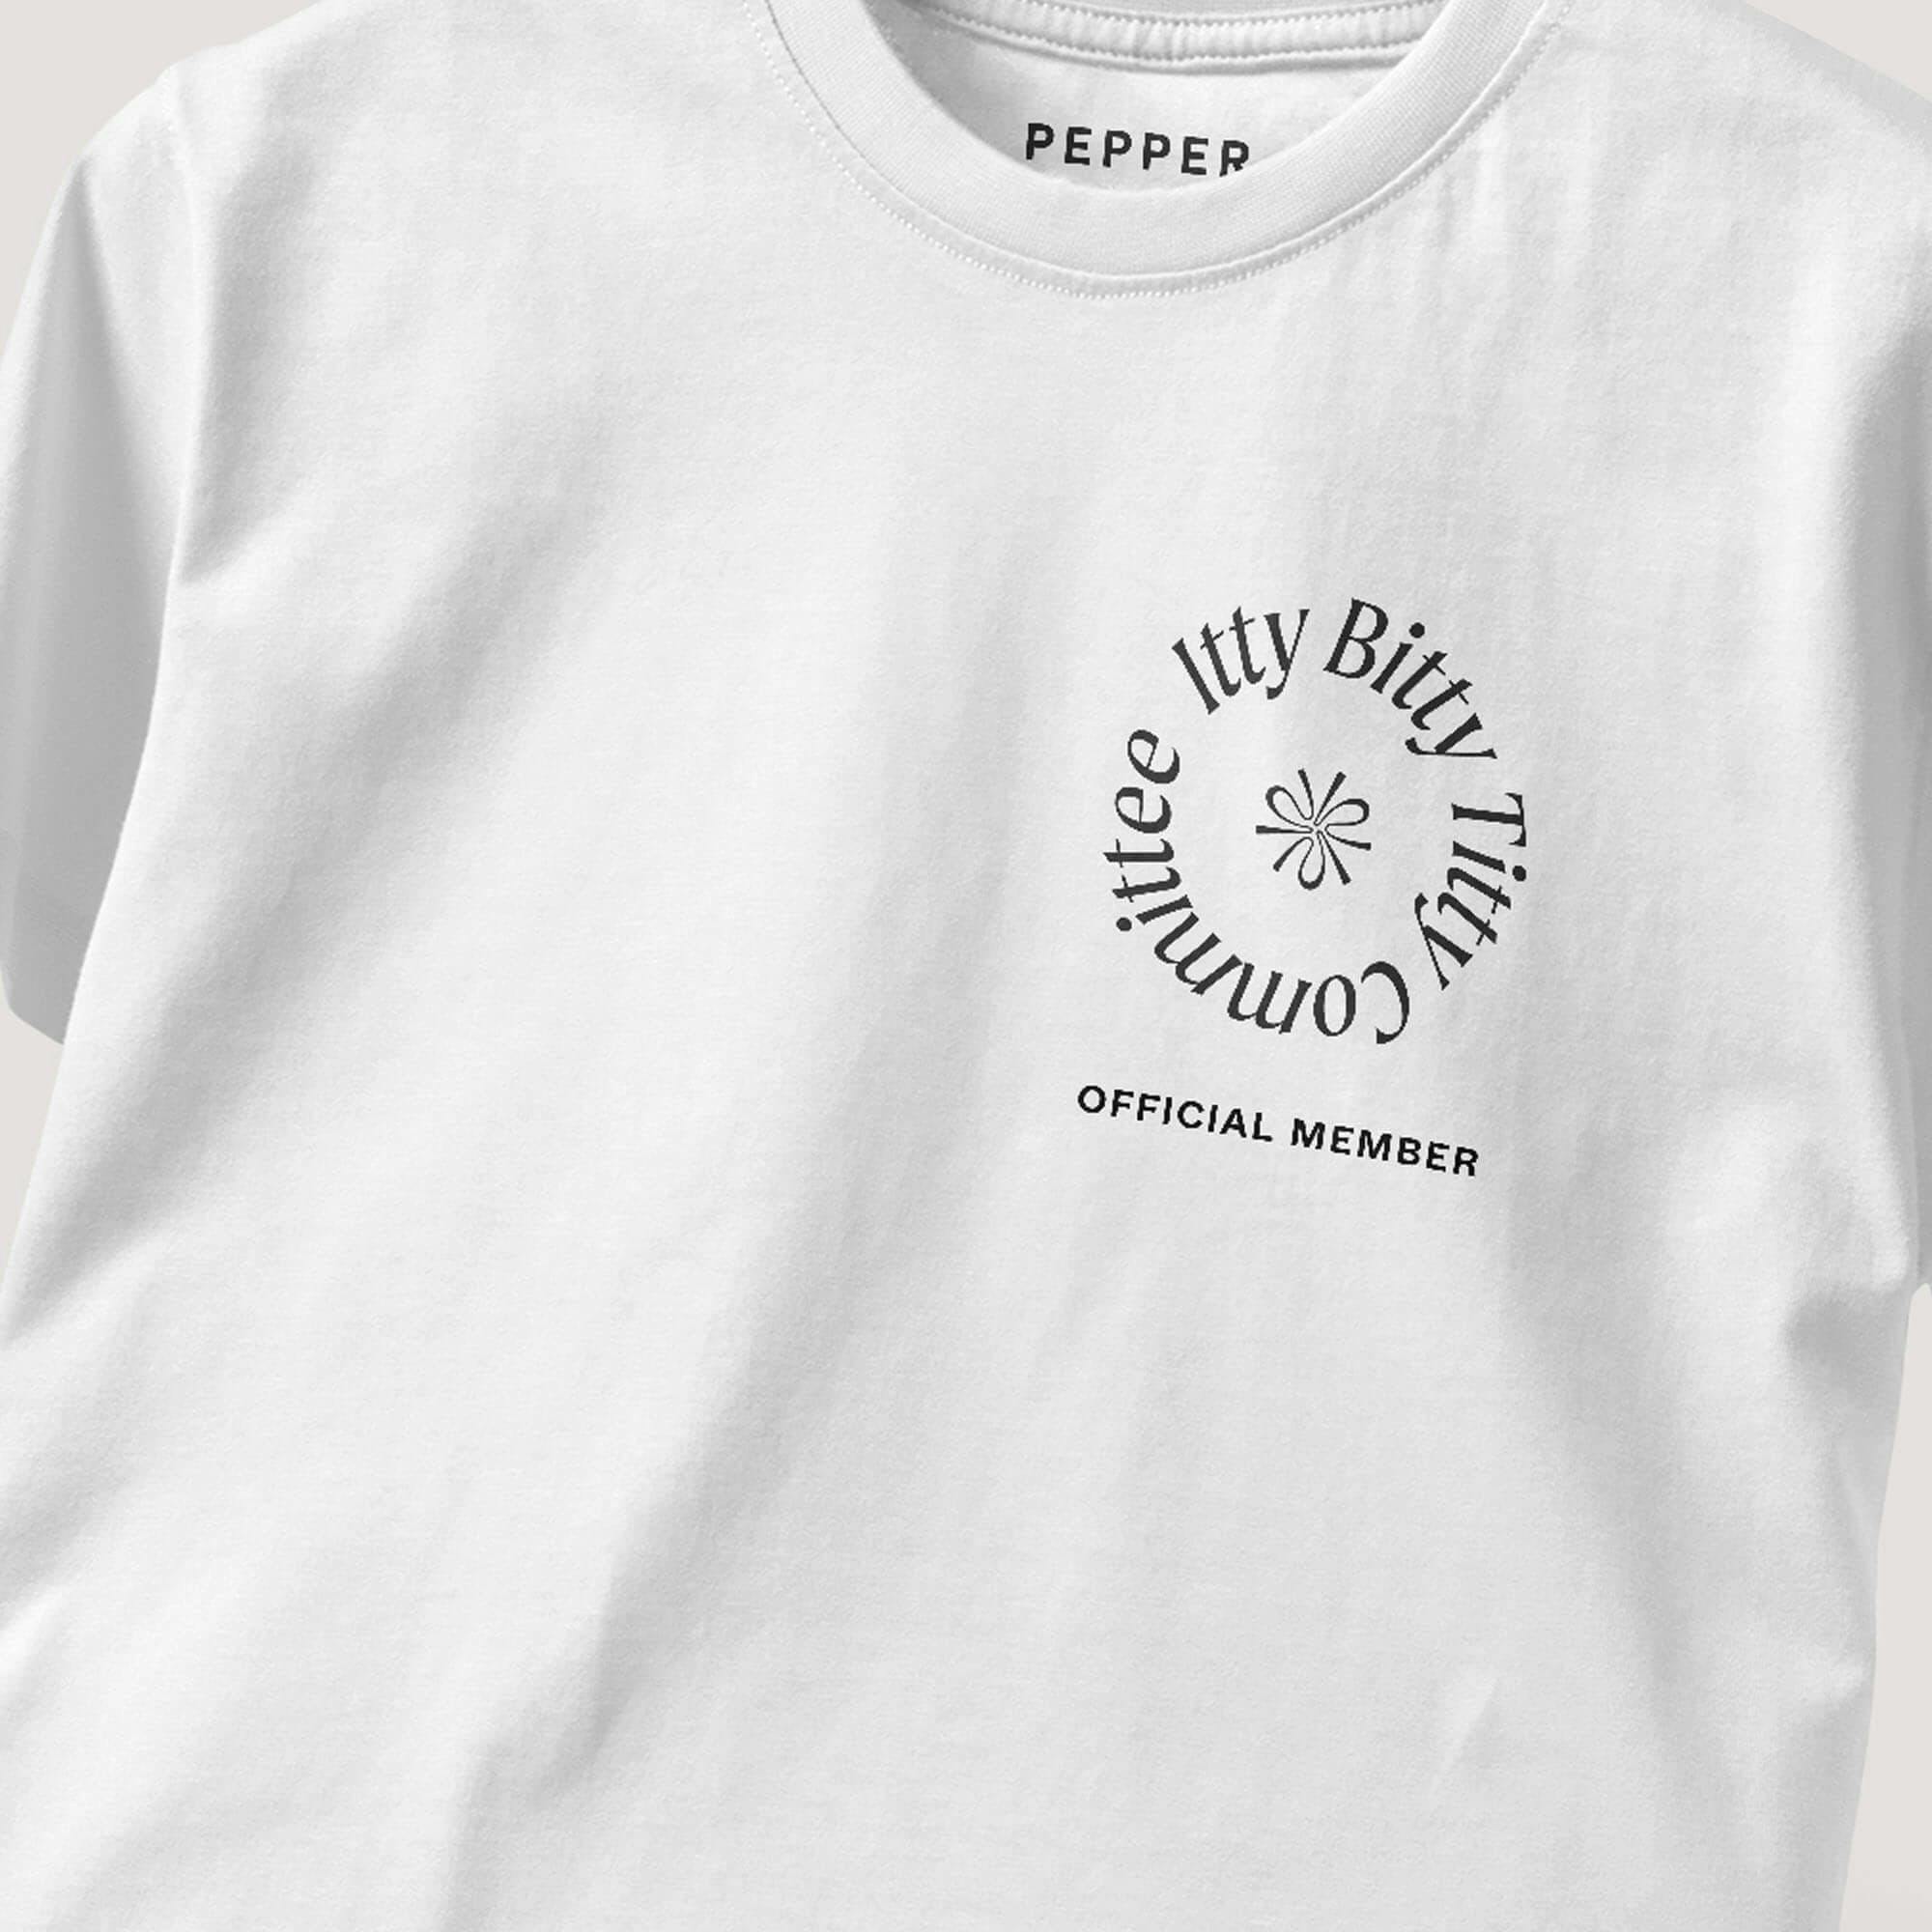 Pepper - Branding, Typography, and Apparel Design